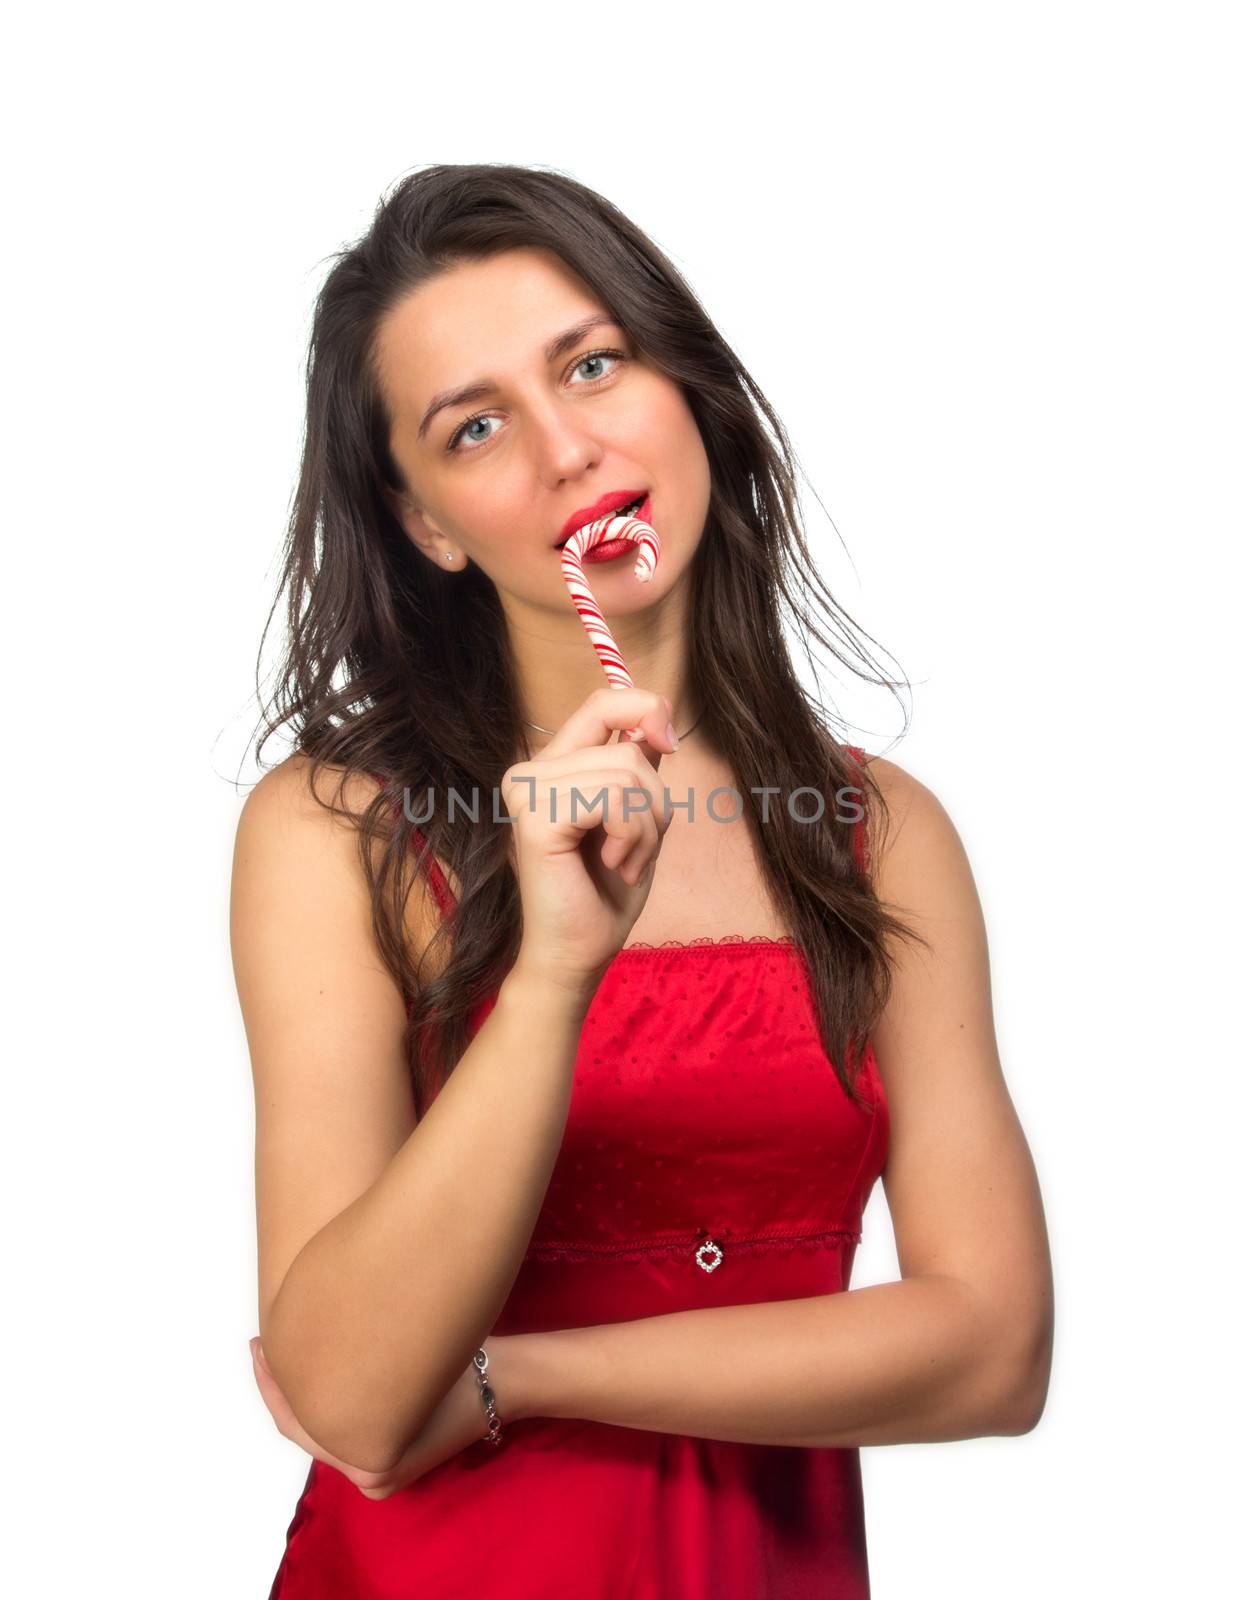 girl lick white-red candy in the form of heart with beautiful make-up   Valentine's day, love.